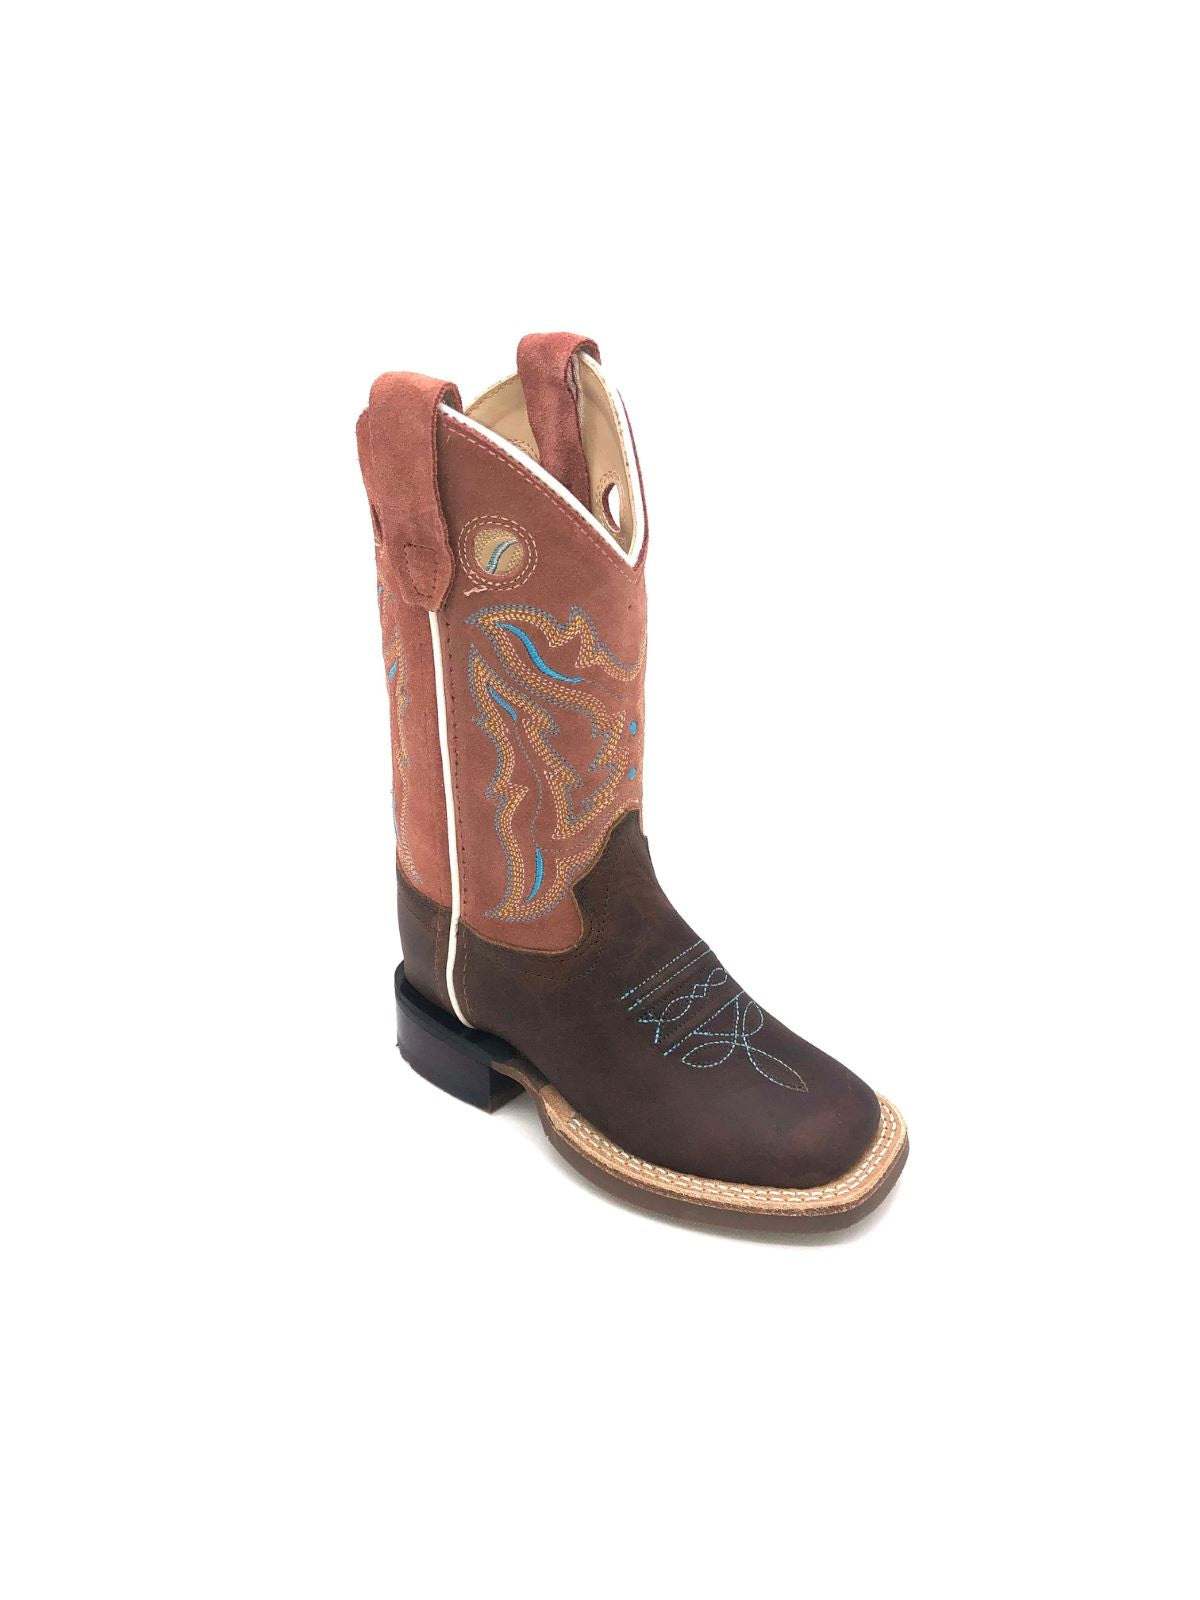 'Old West' Children's Western Broad Square Toe - Brown / Rust